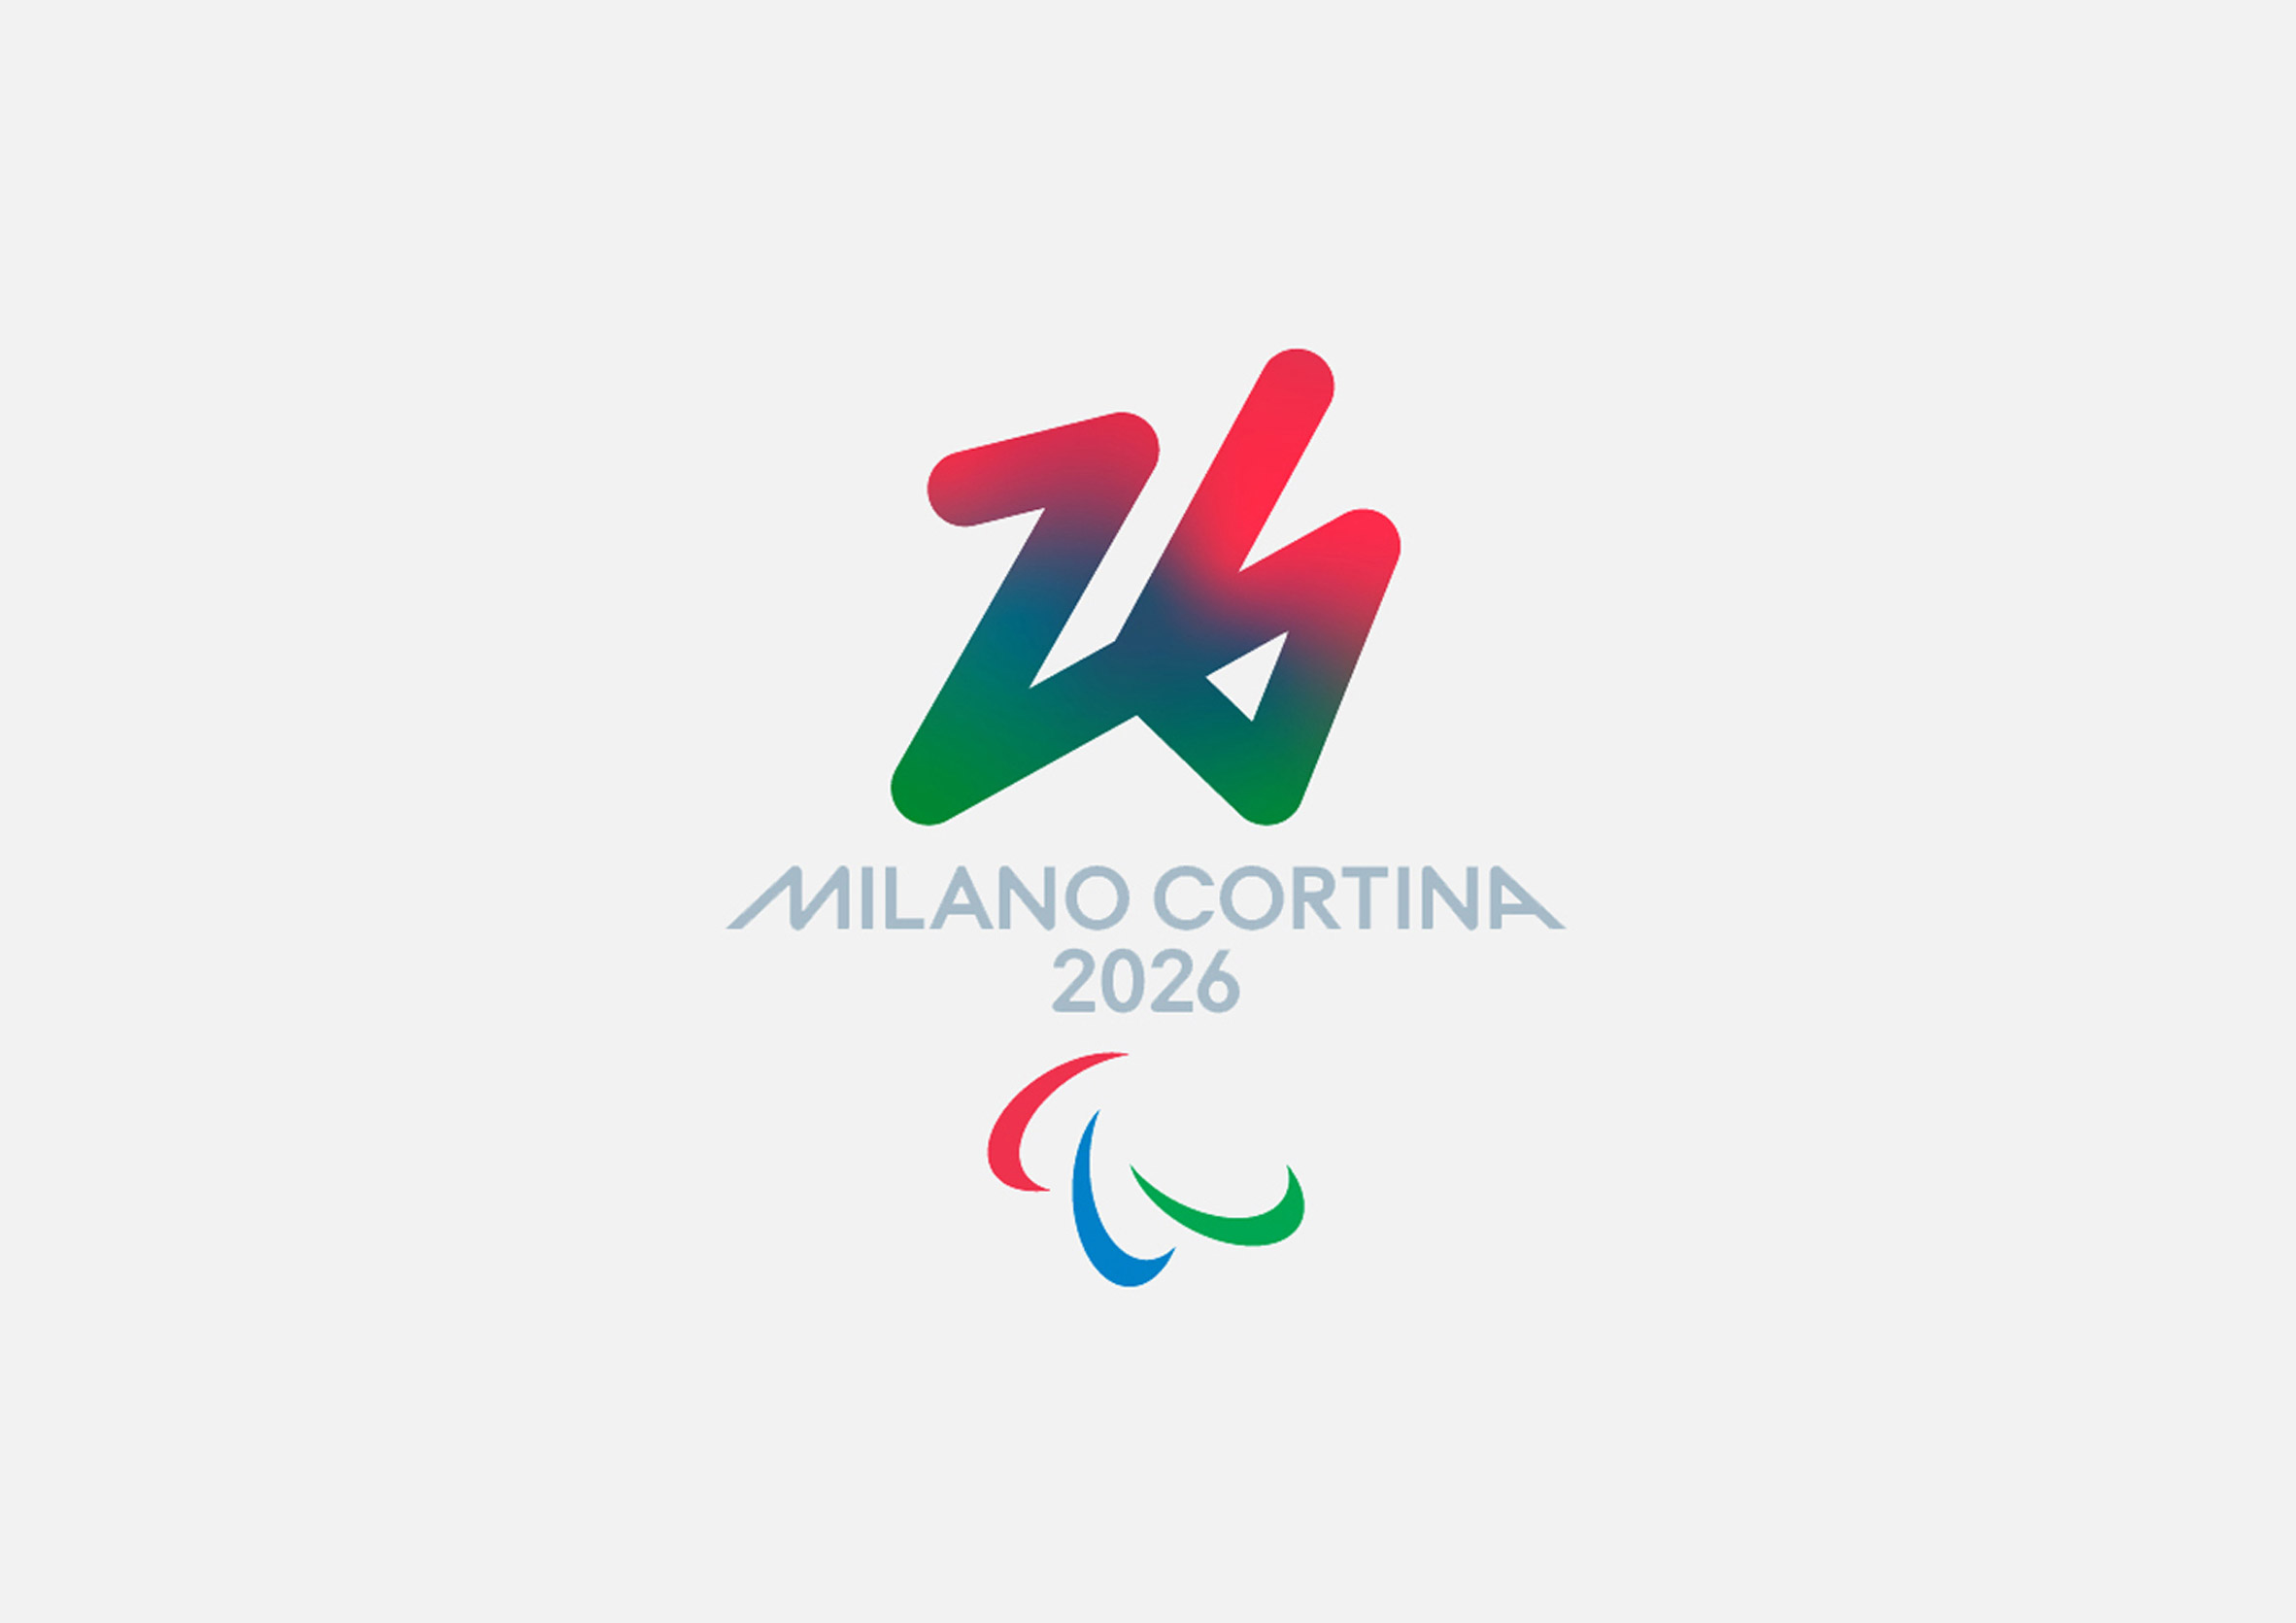 The paralympic logo for the 2026 Winter Olympic Games has a red, blue and green colouring